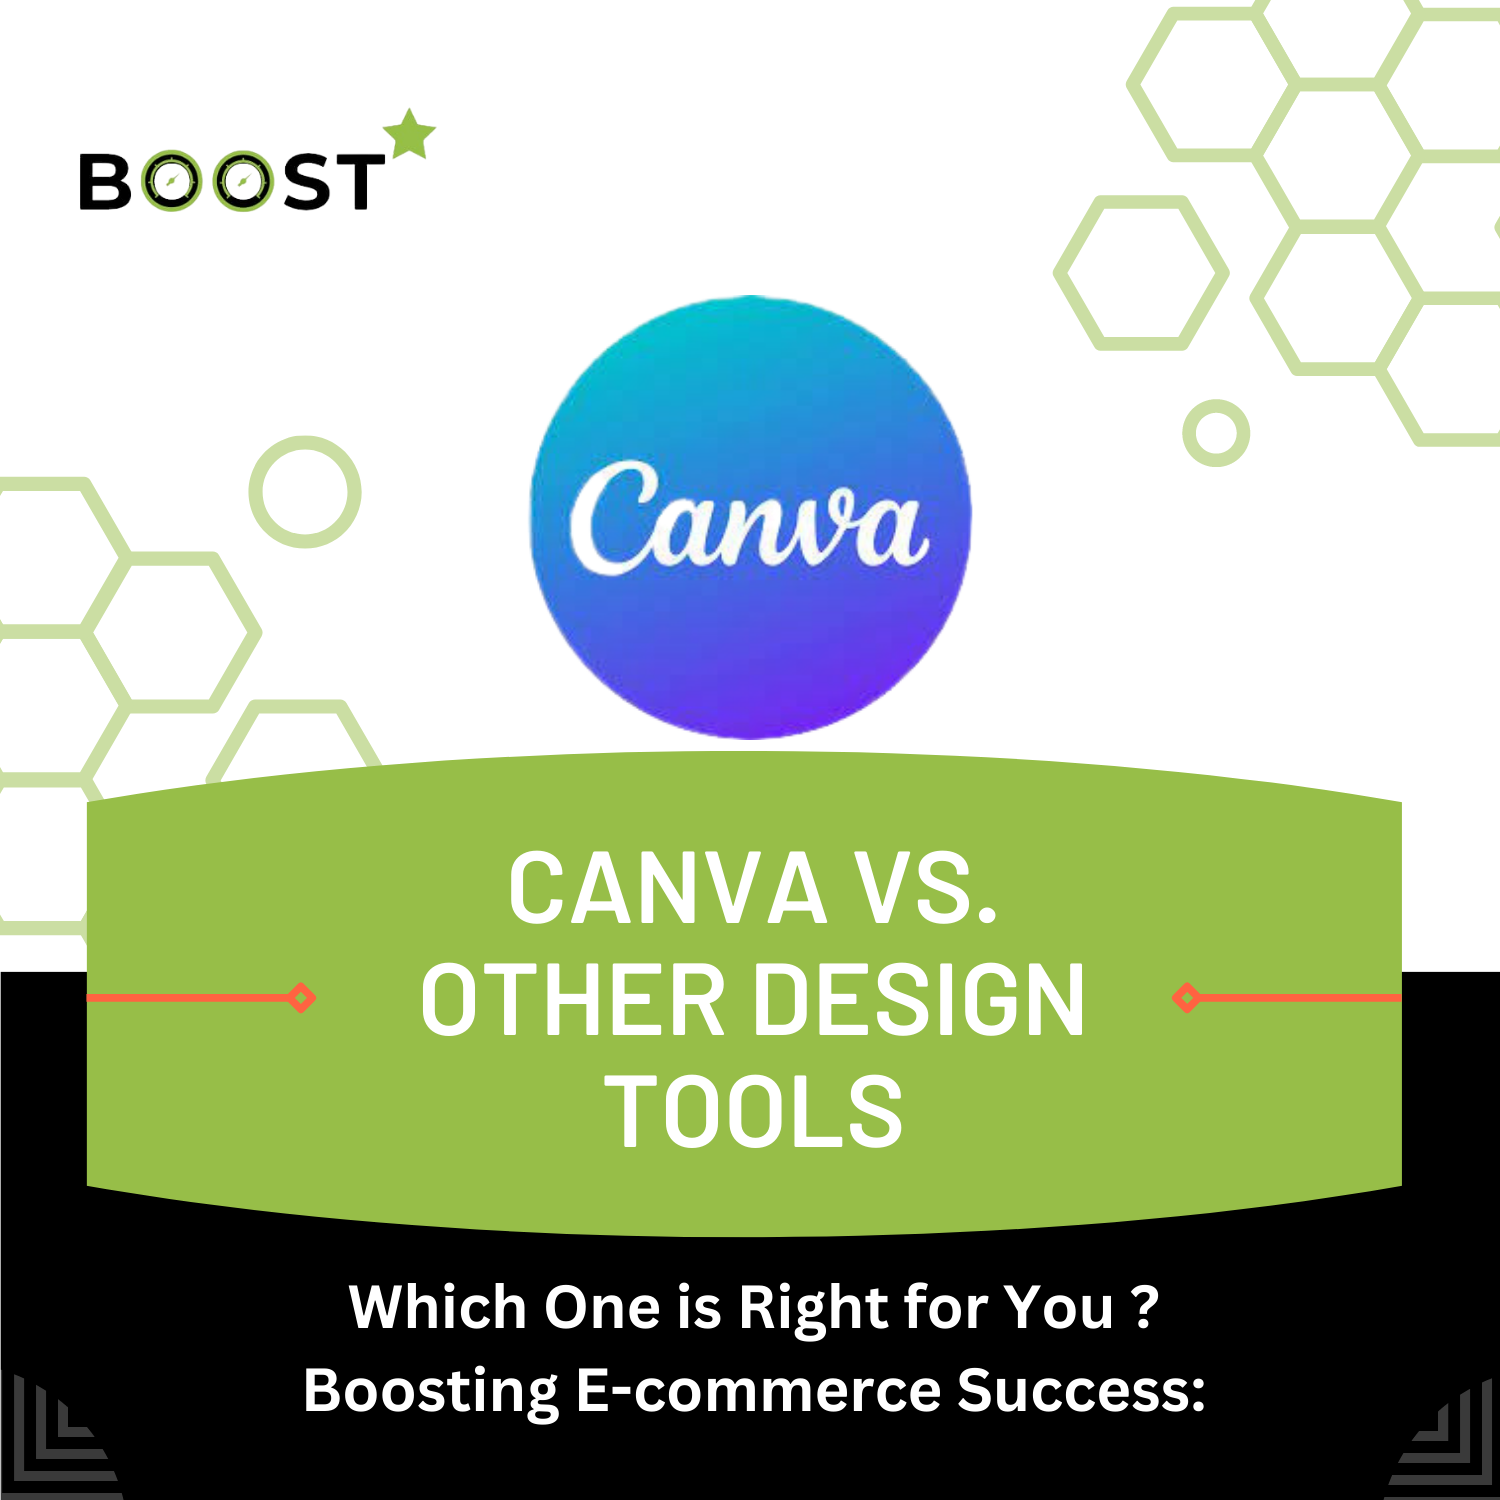 Canva vs. Other Design Tools: Which One is Right for You